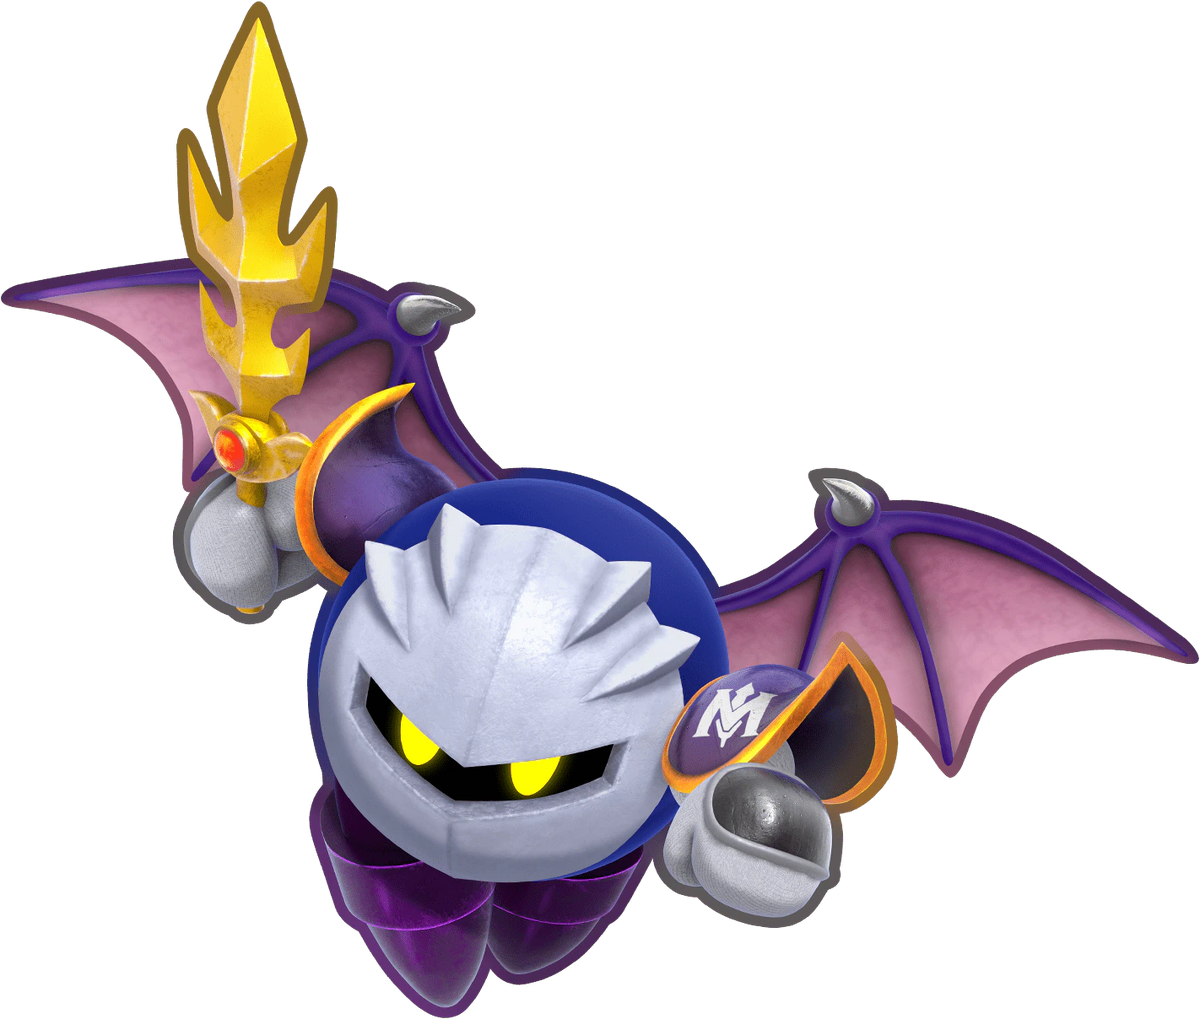 Who should I get rid of for Meta-Knight? : r/allstartowerdefense